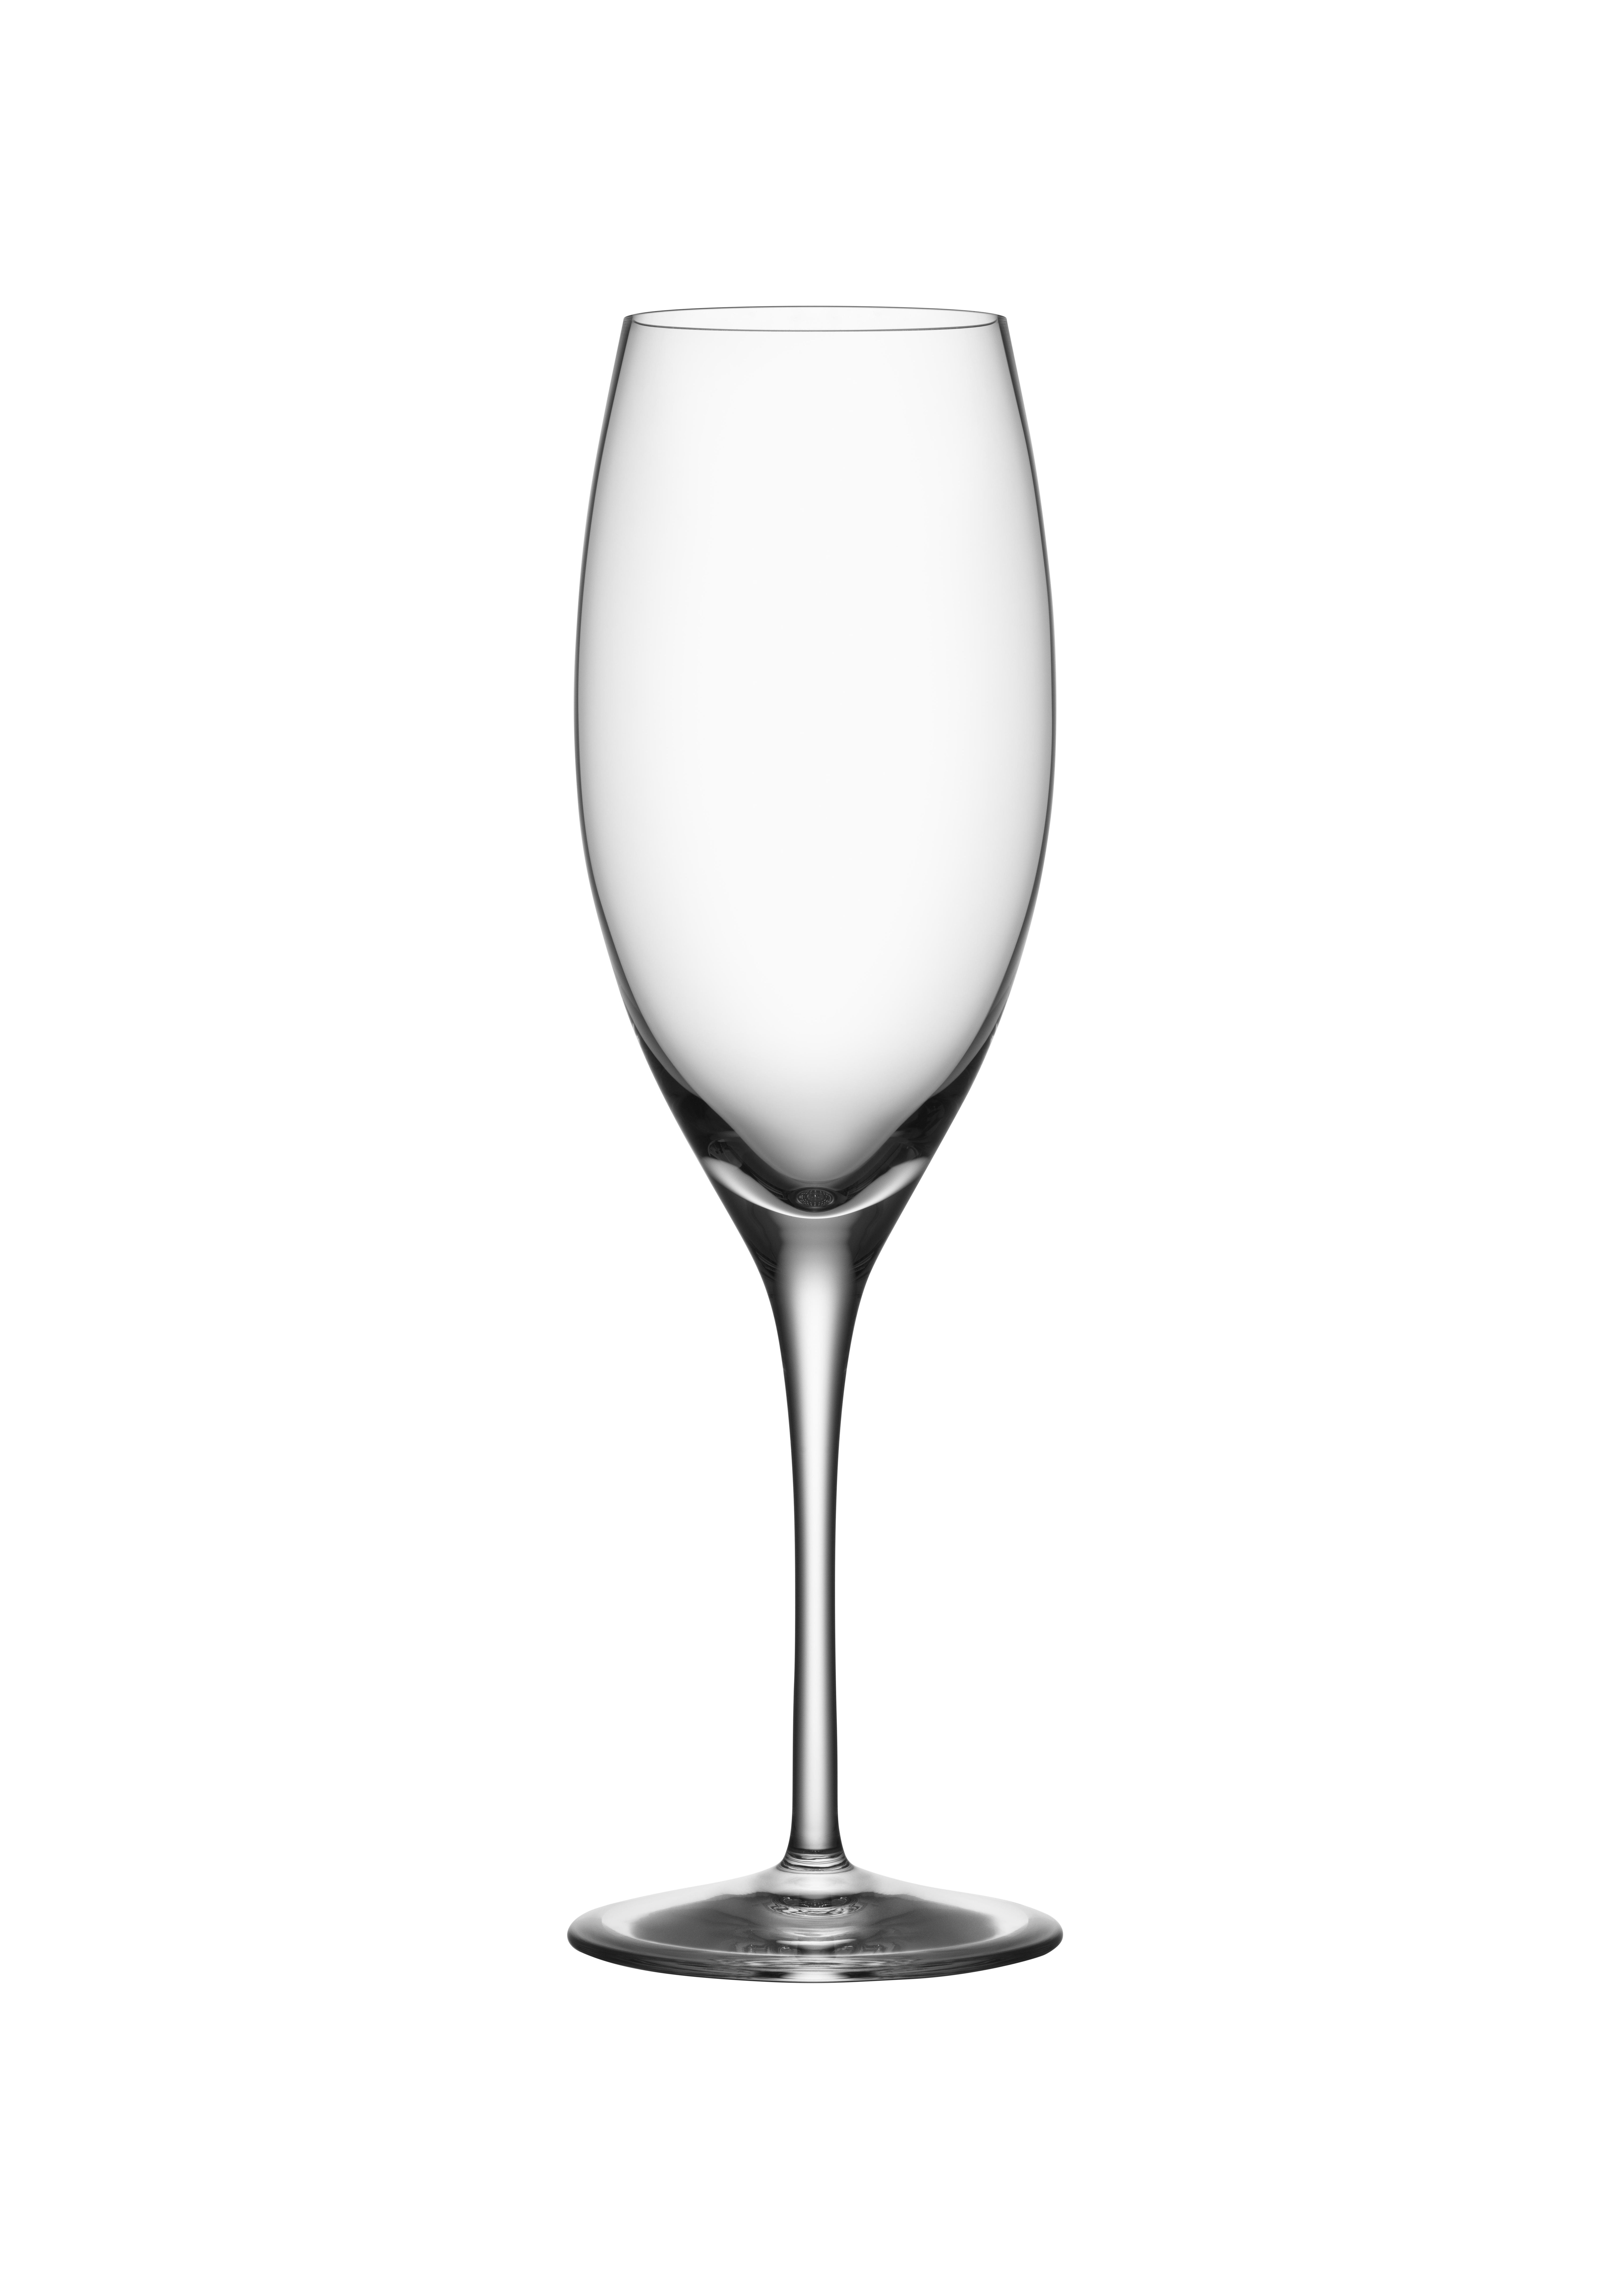 Premier Champagne from Orrefors, which holds 10 oz, is outstanding for all kinds of sparkling wines, with its tall, narrow shape preserving the bubbles in the beverage. The champagne glass is mouth-blown with a handmade stem and is an elegant